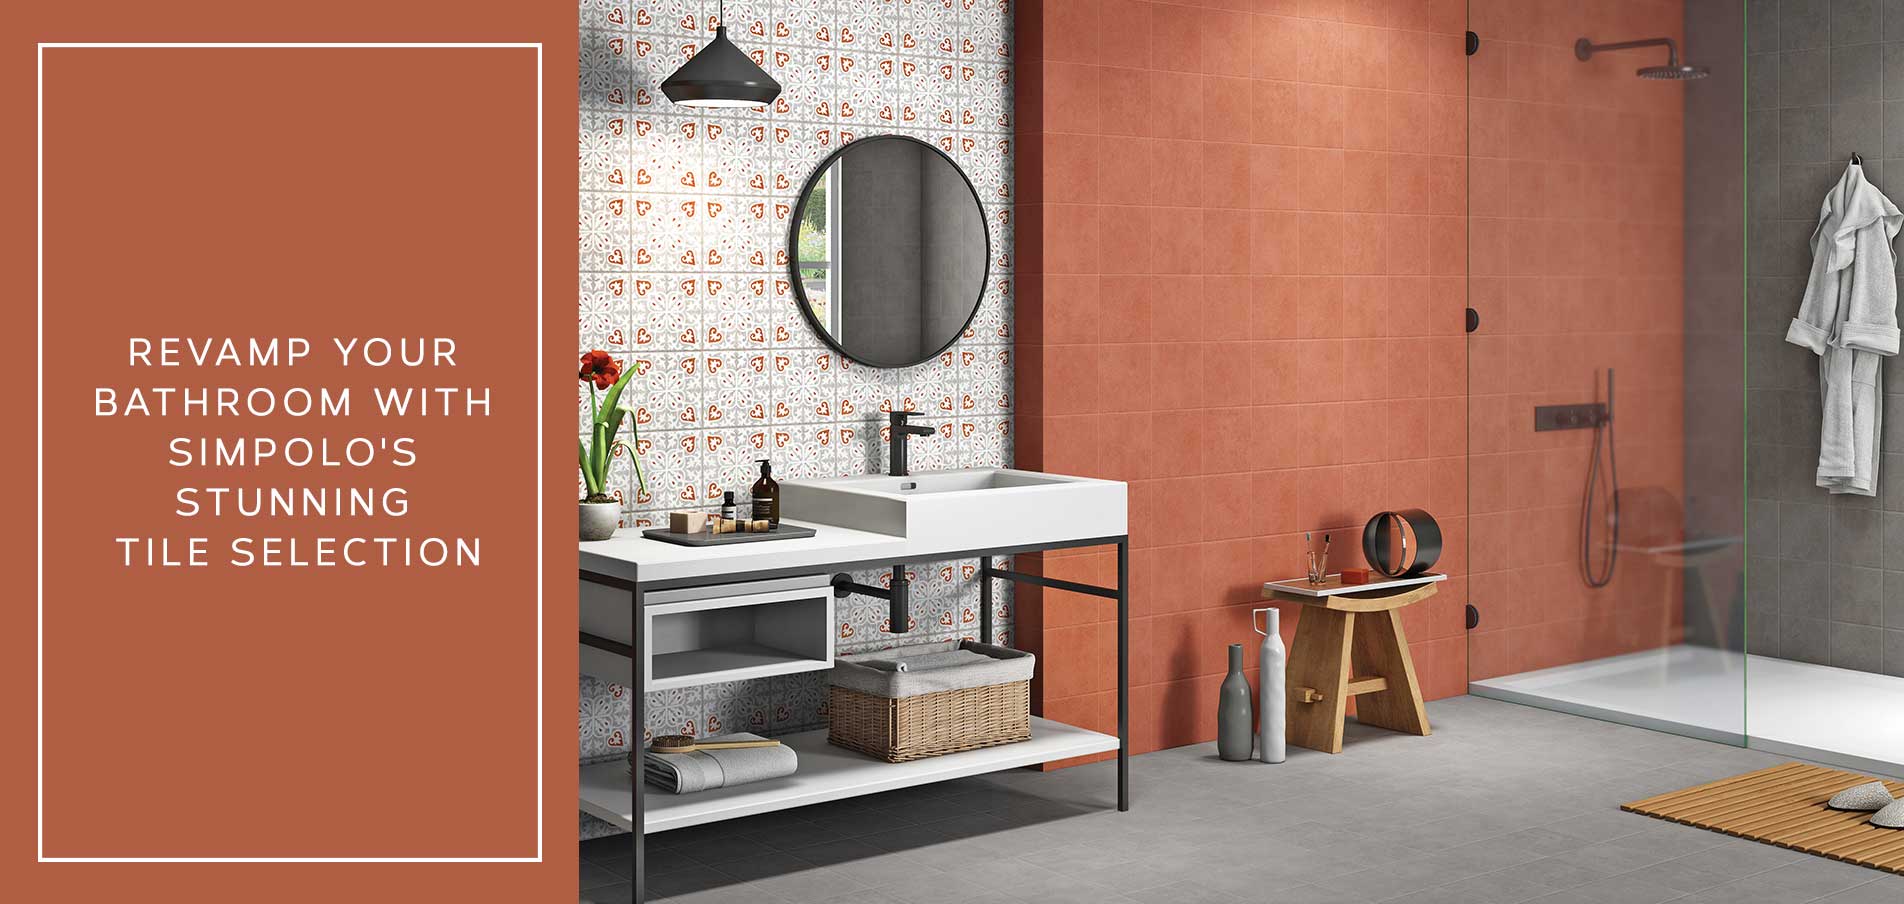 Revamp Your Bathroom With Simpolos Stunning Tile Selection